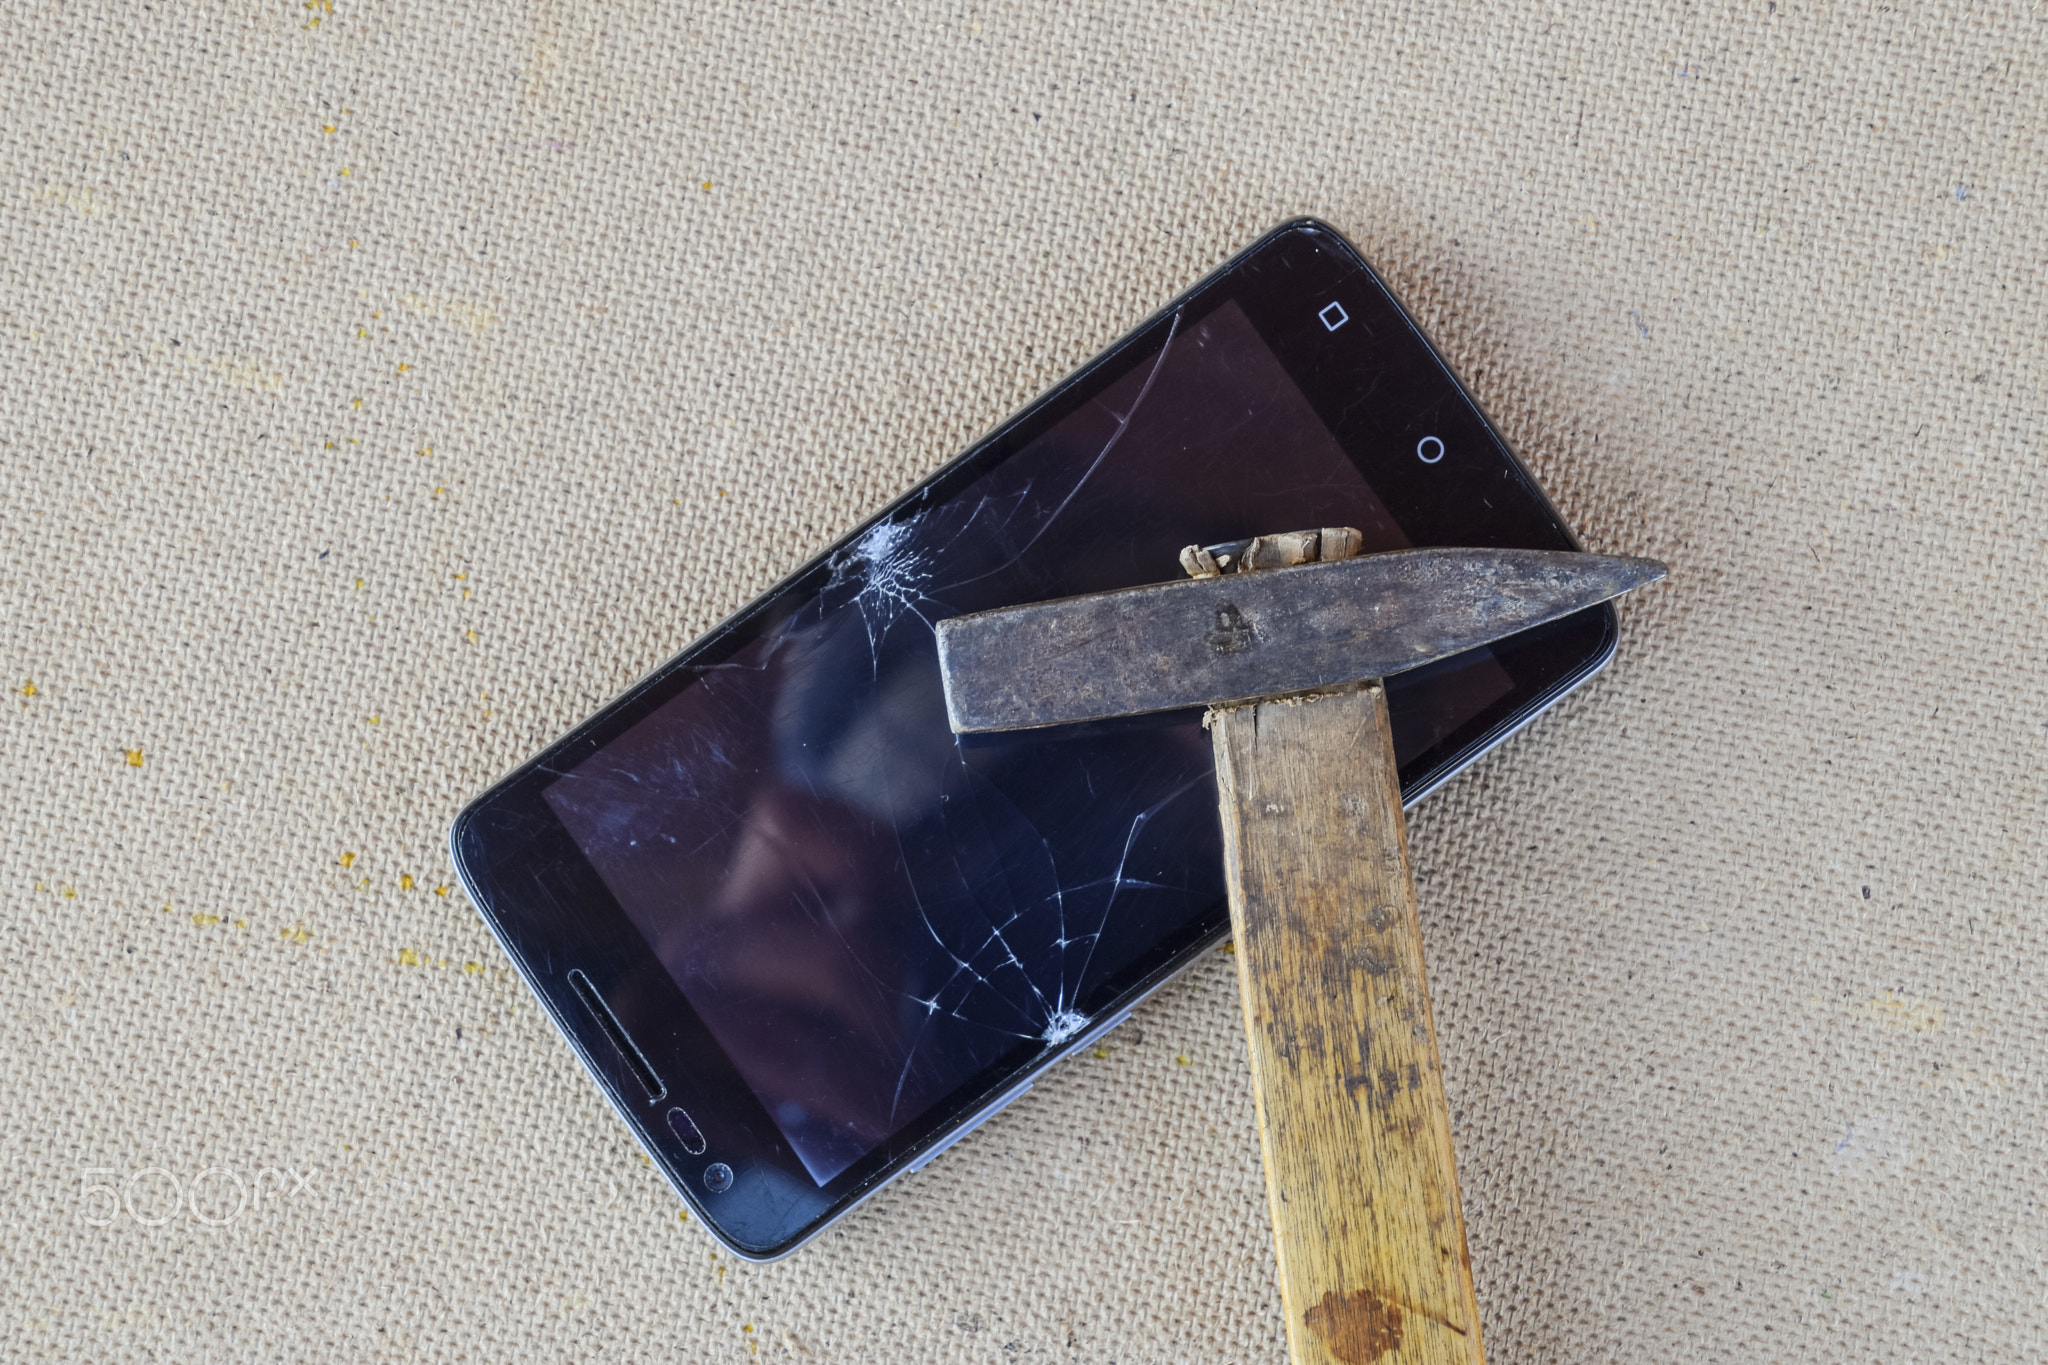 Hammer and smartphone. The screen of the smartphone, a broken ha